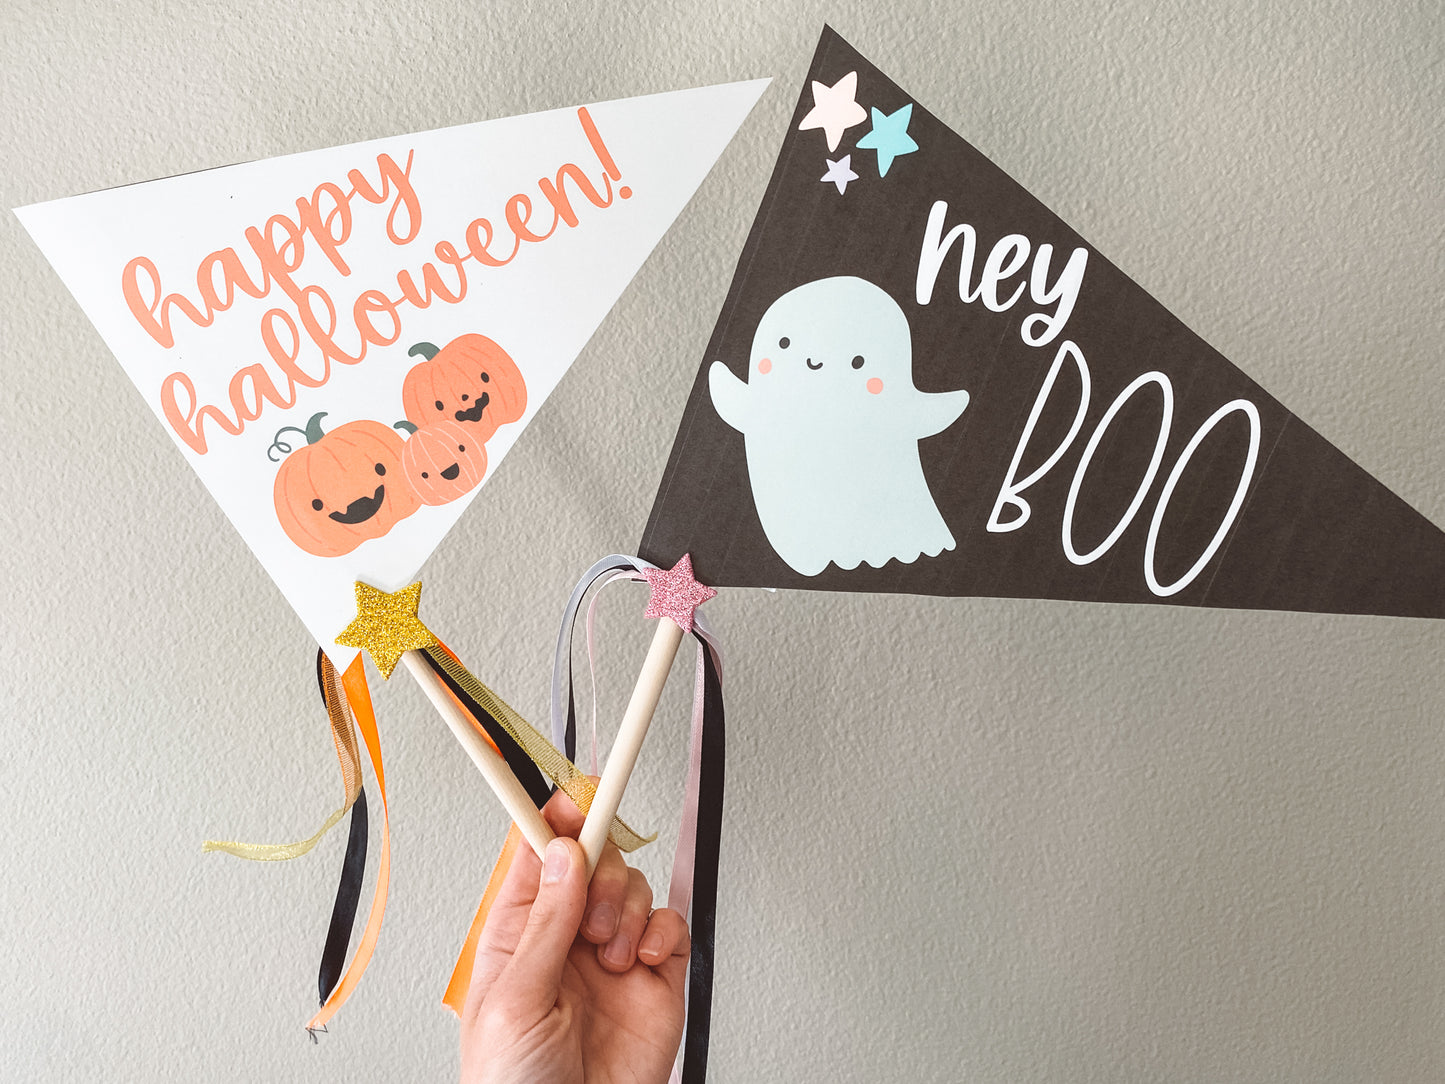 Happy Halloween flag is white with orange text and three orange pumpkins below the text. Hey Boo flag is black with white text and a bluish white ghost. Three stars in the upper left corner. Both on rods with ribbon.